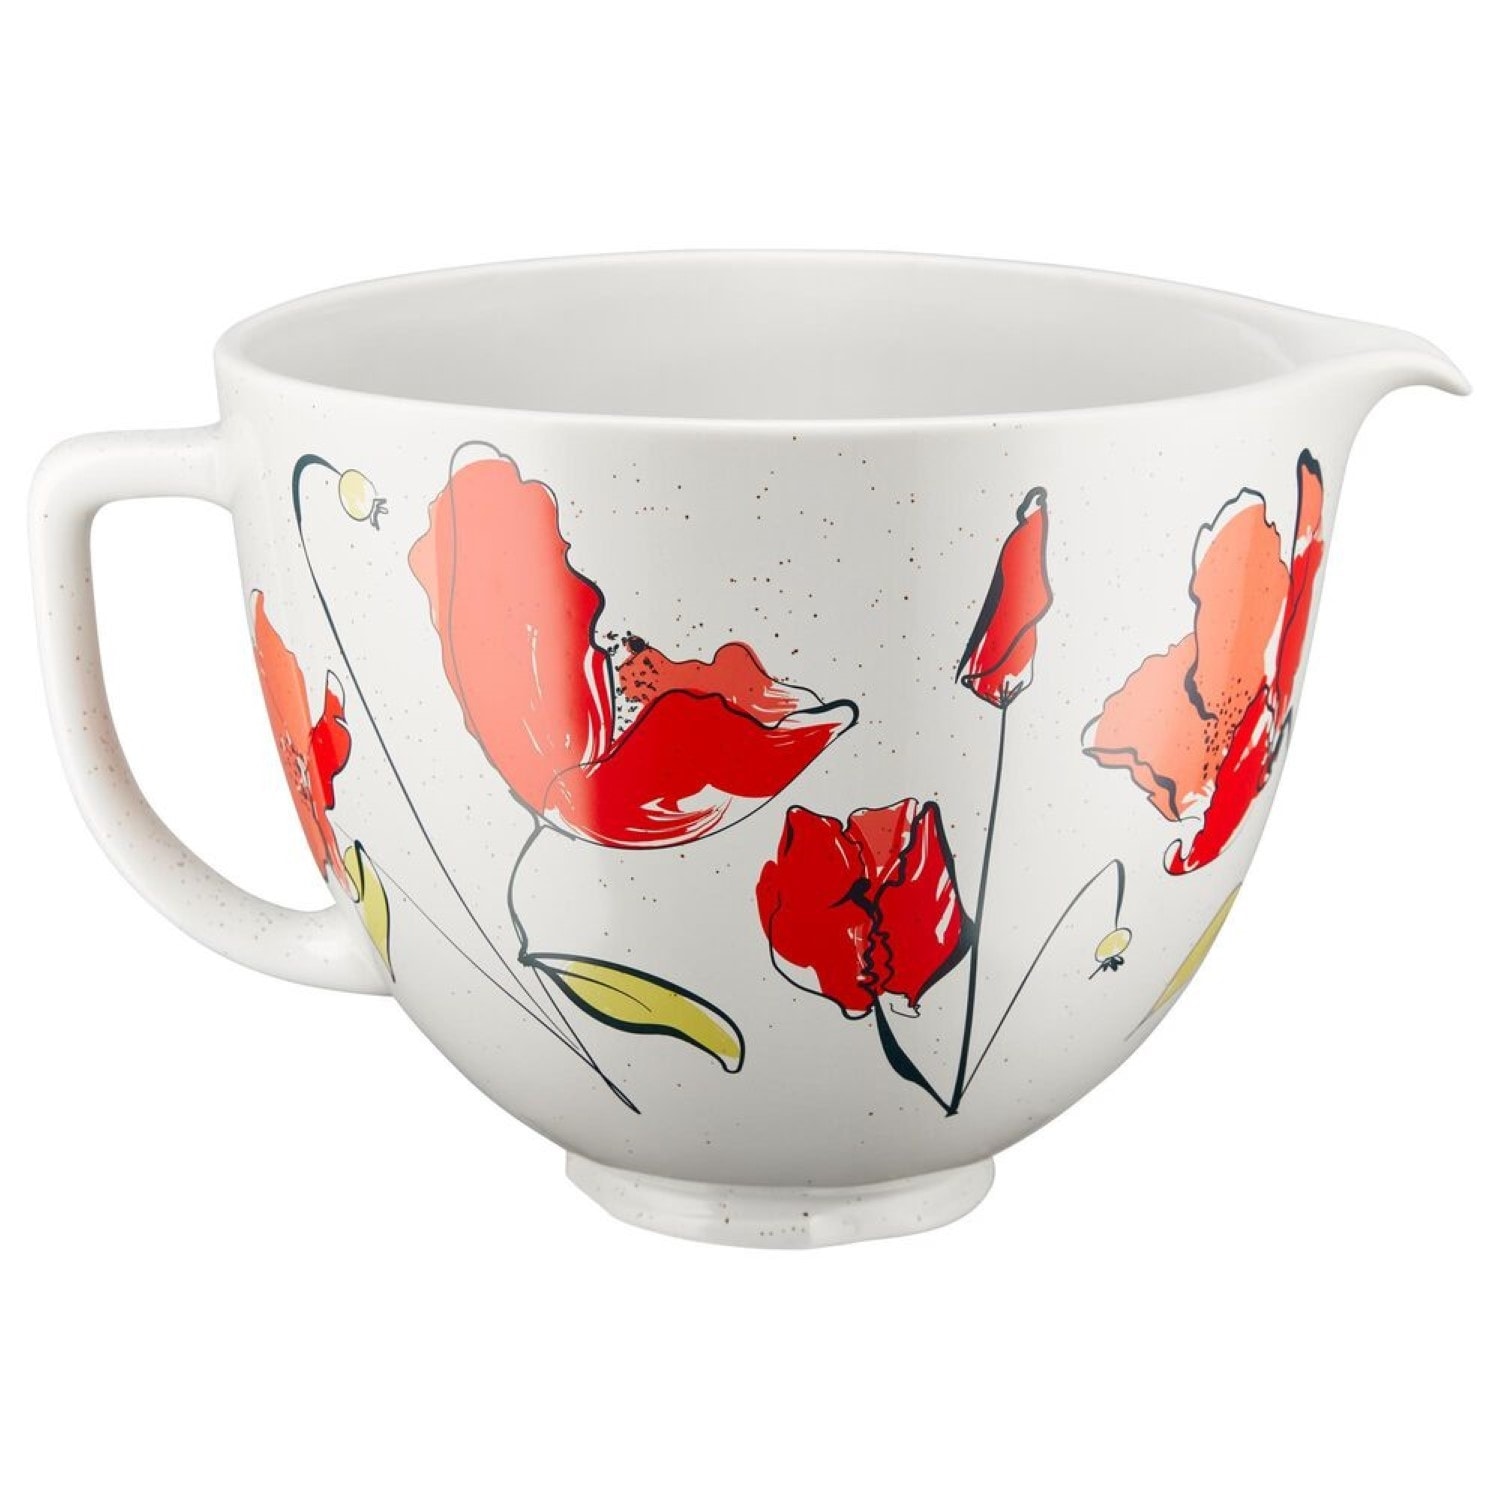 https://ak1.ostkcdn.com/images/products/is/images/direct/d1b8477f91b52ad2af4208b20aa2414c1df1f77d/KitchenAid-5-Quart-Poppy-Ceramic-Stand-Mixer-Bowl.jpg